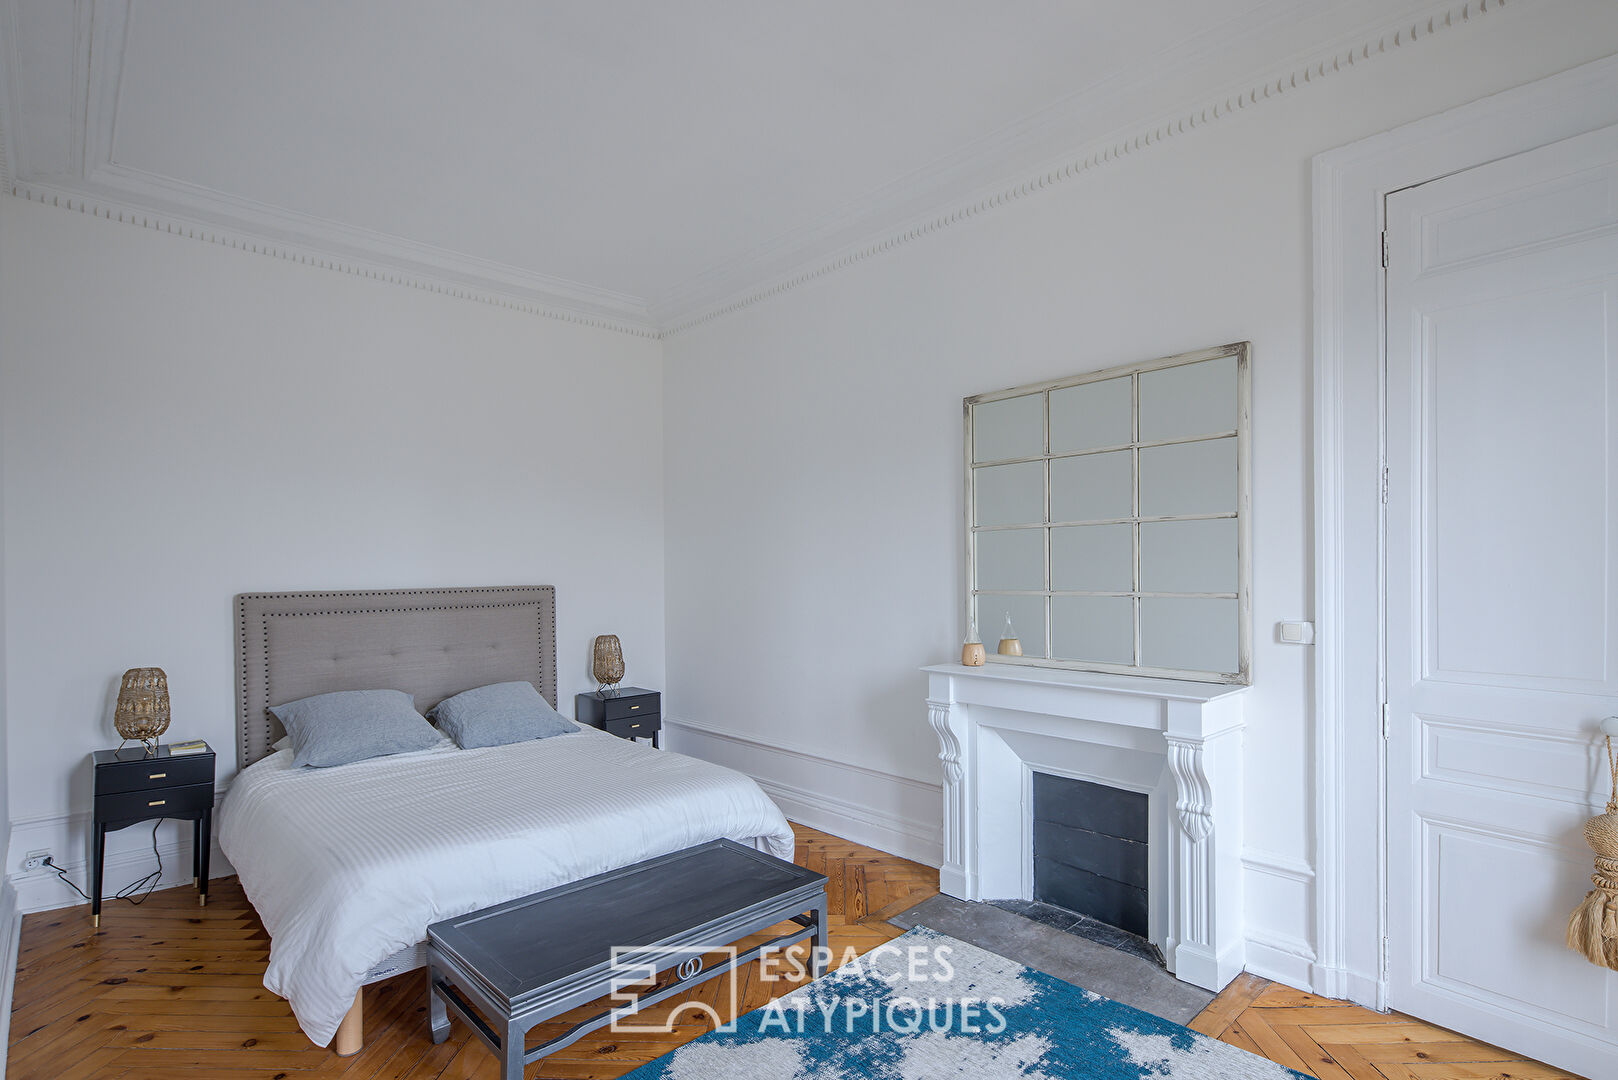 Furnished Haussmann apartment with a view